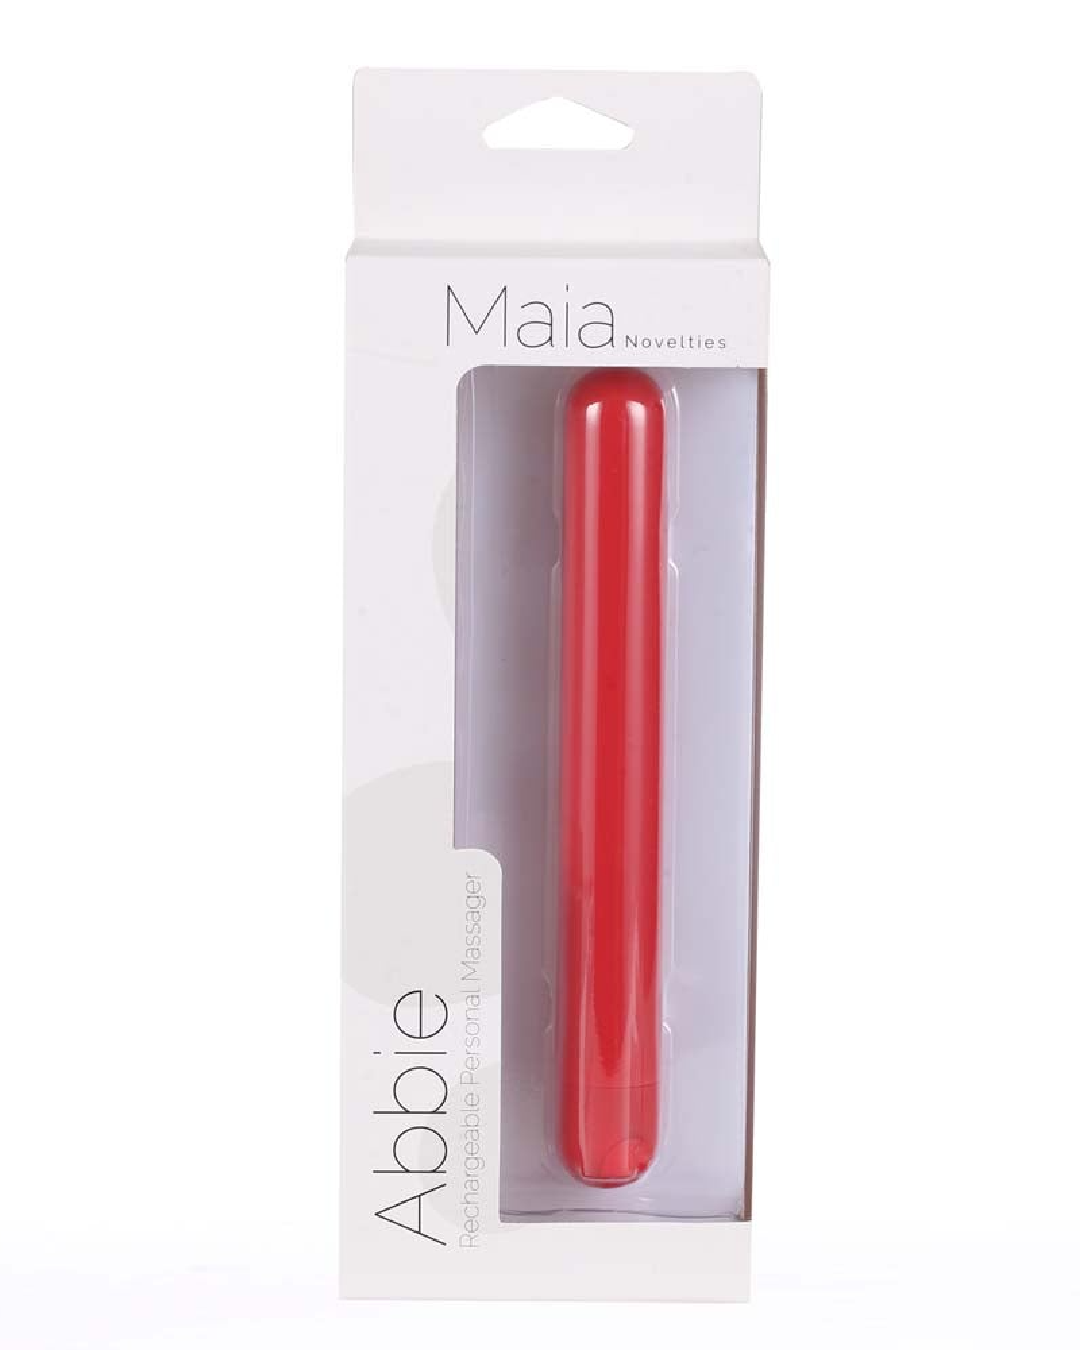 Abbie X-Long Super Charged Red Bullet Vibrator in the box